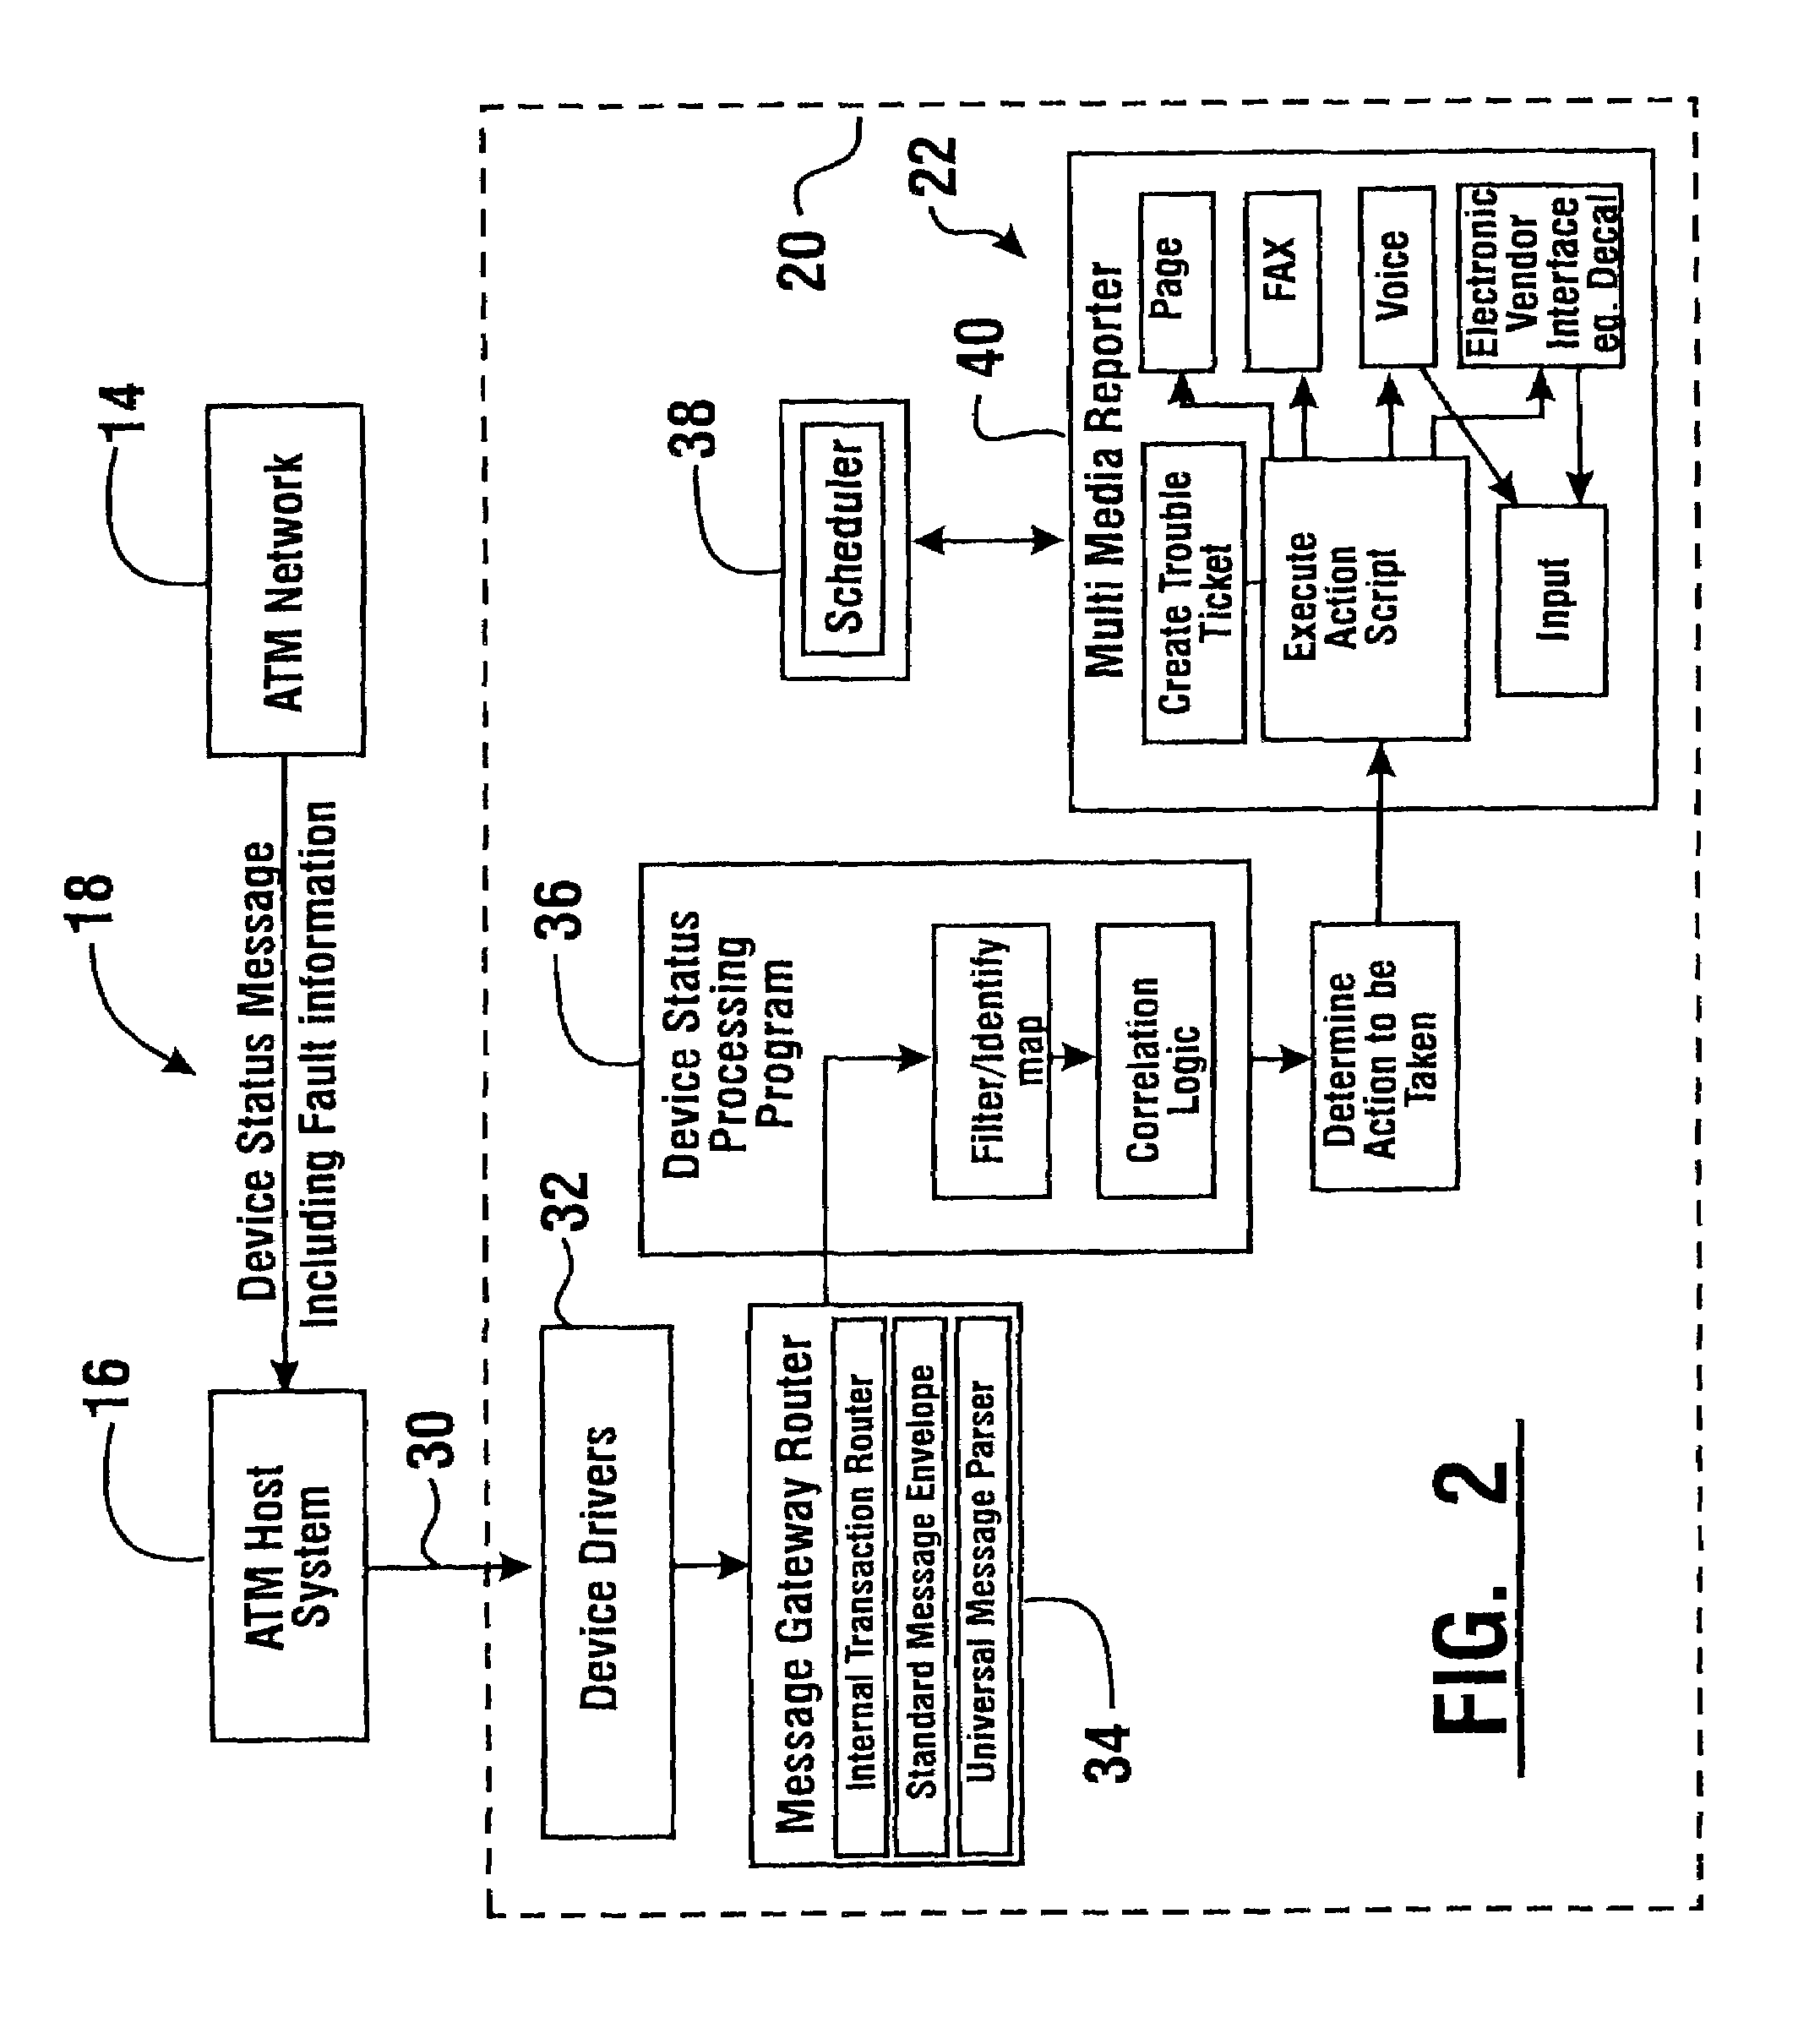 Fault monitoring and notification system for automated banking machines